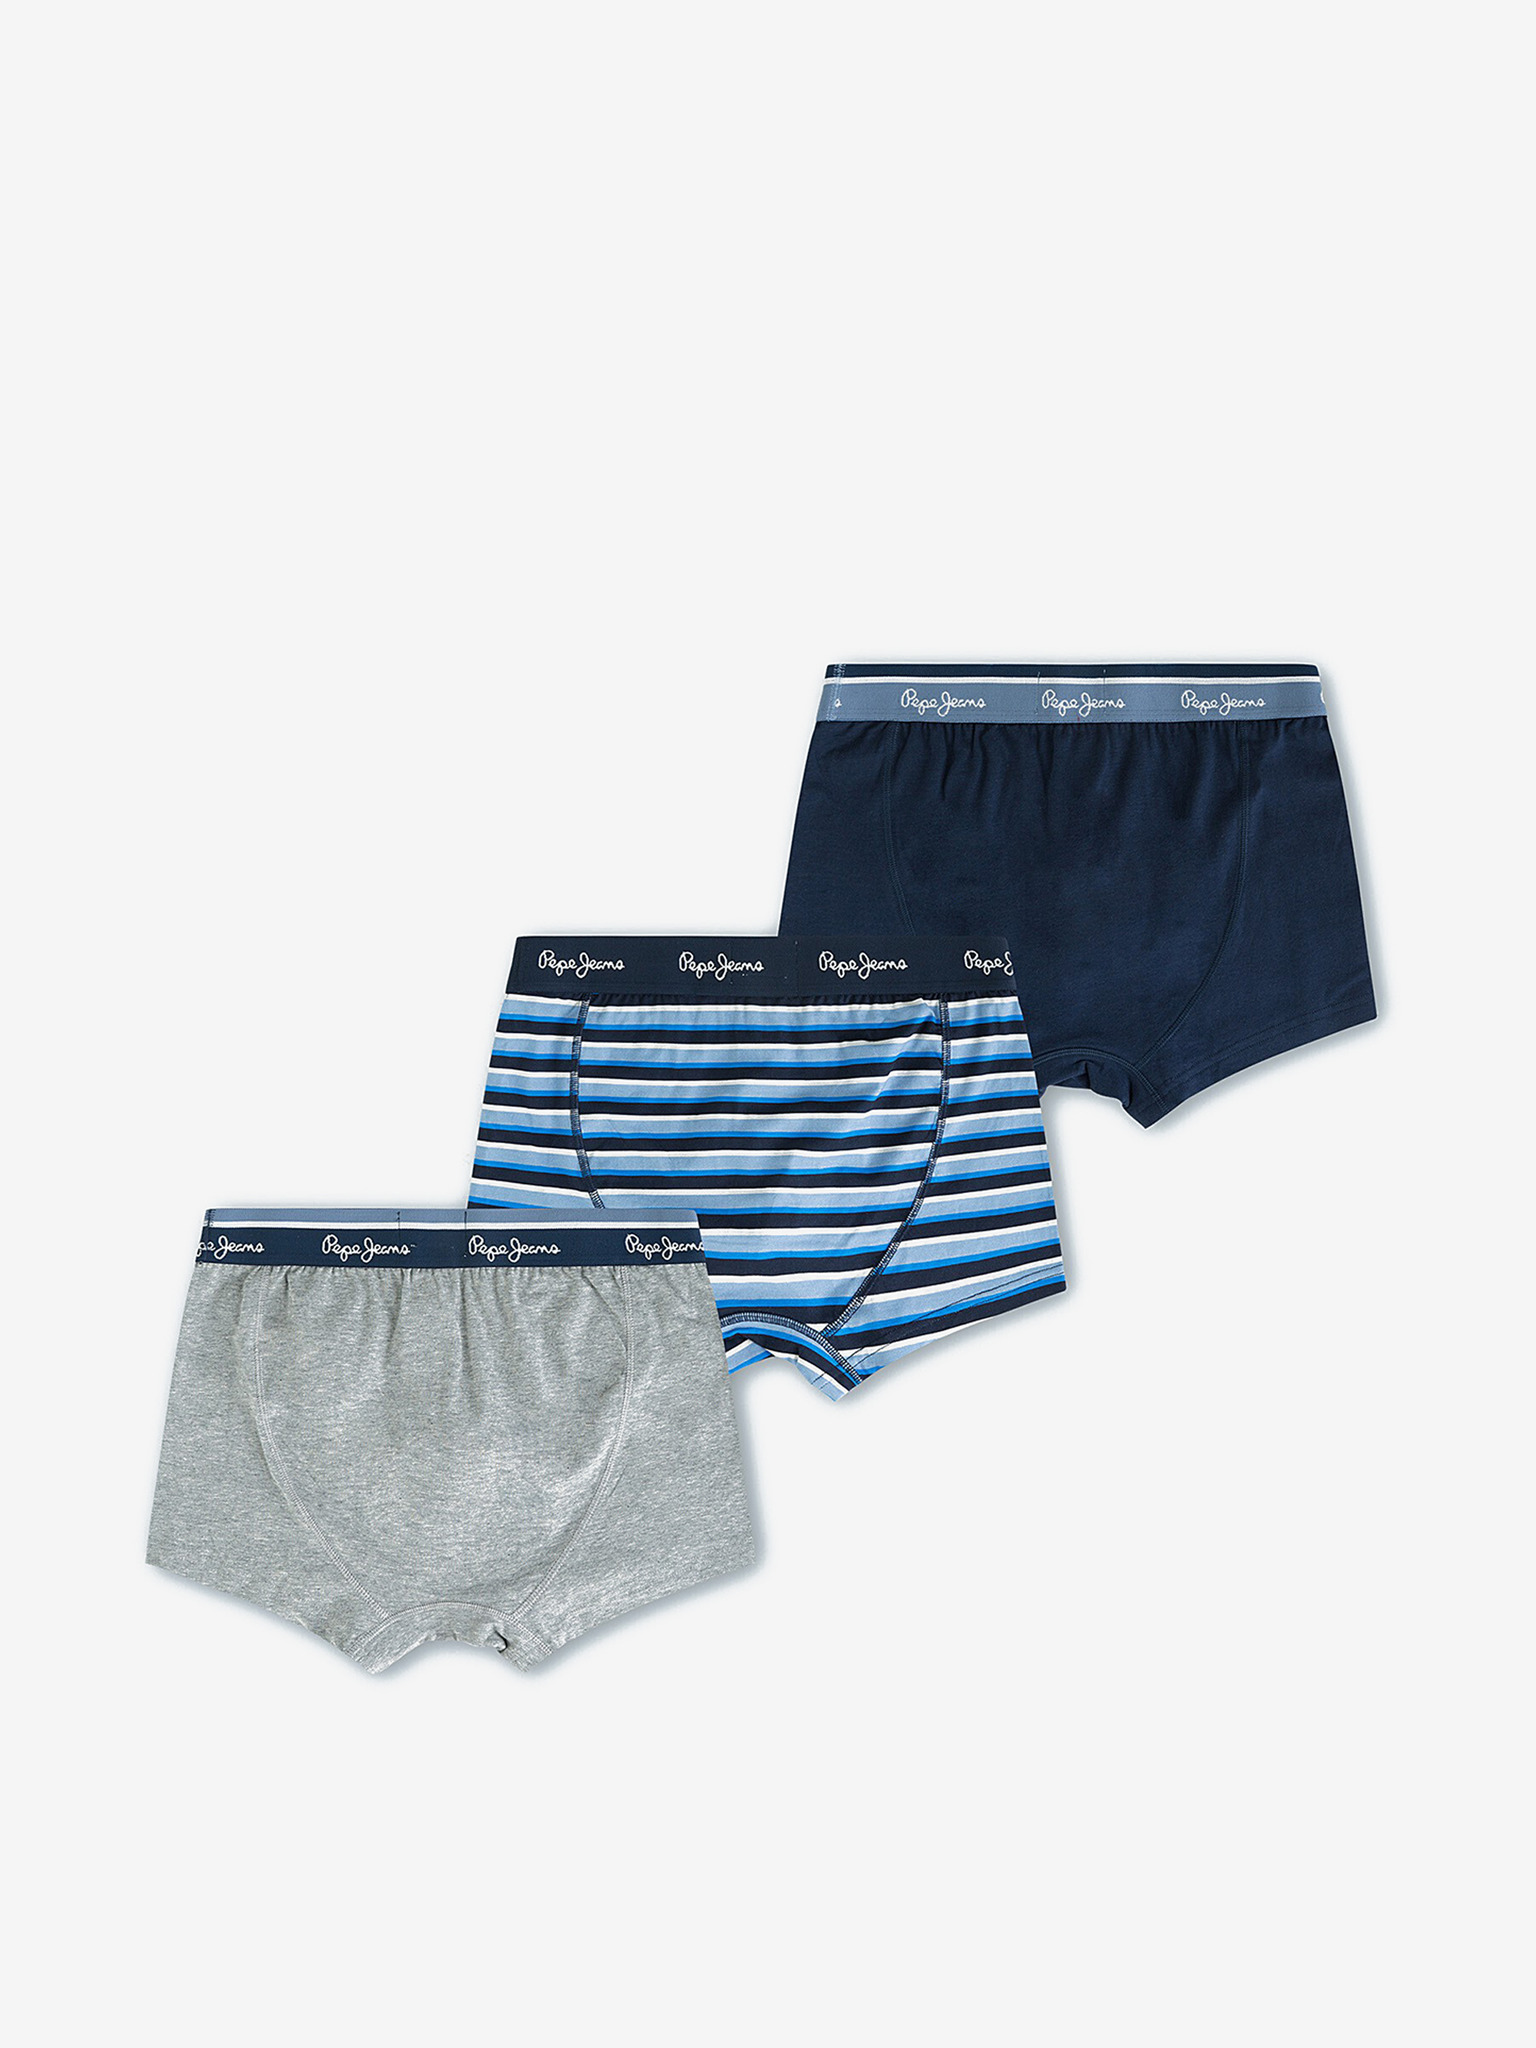 Pepe Jeans - Judd Boxers 3 Piece